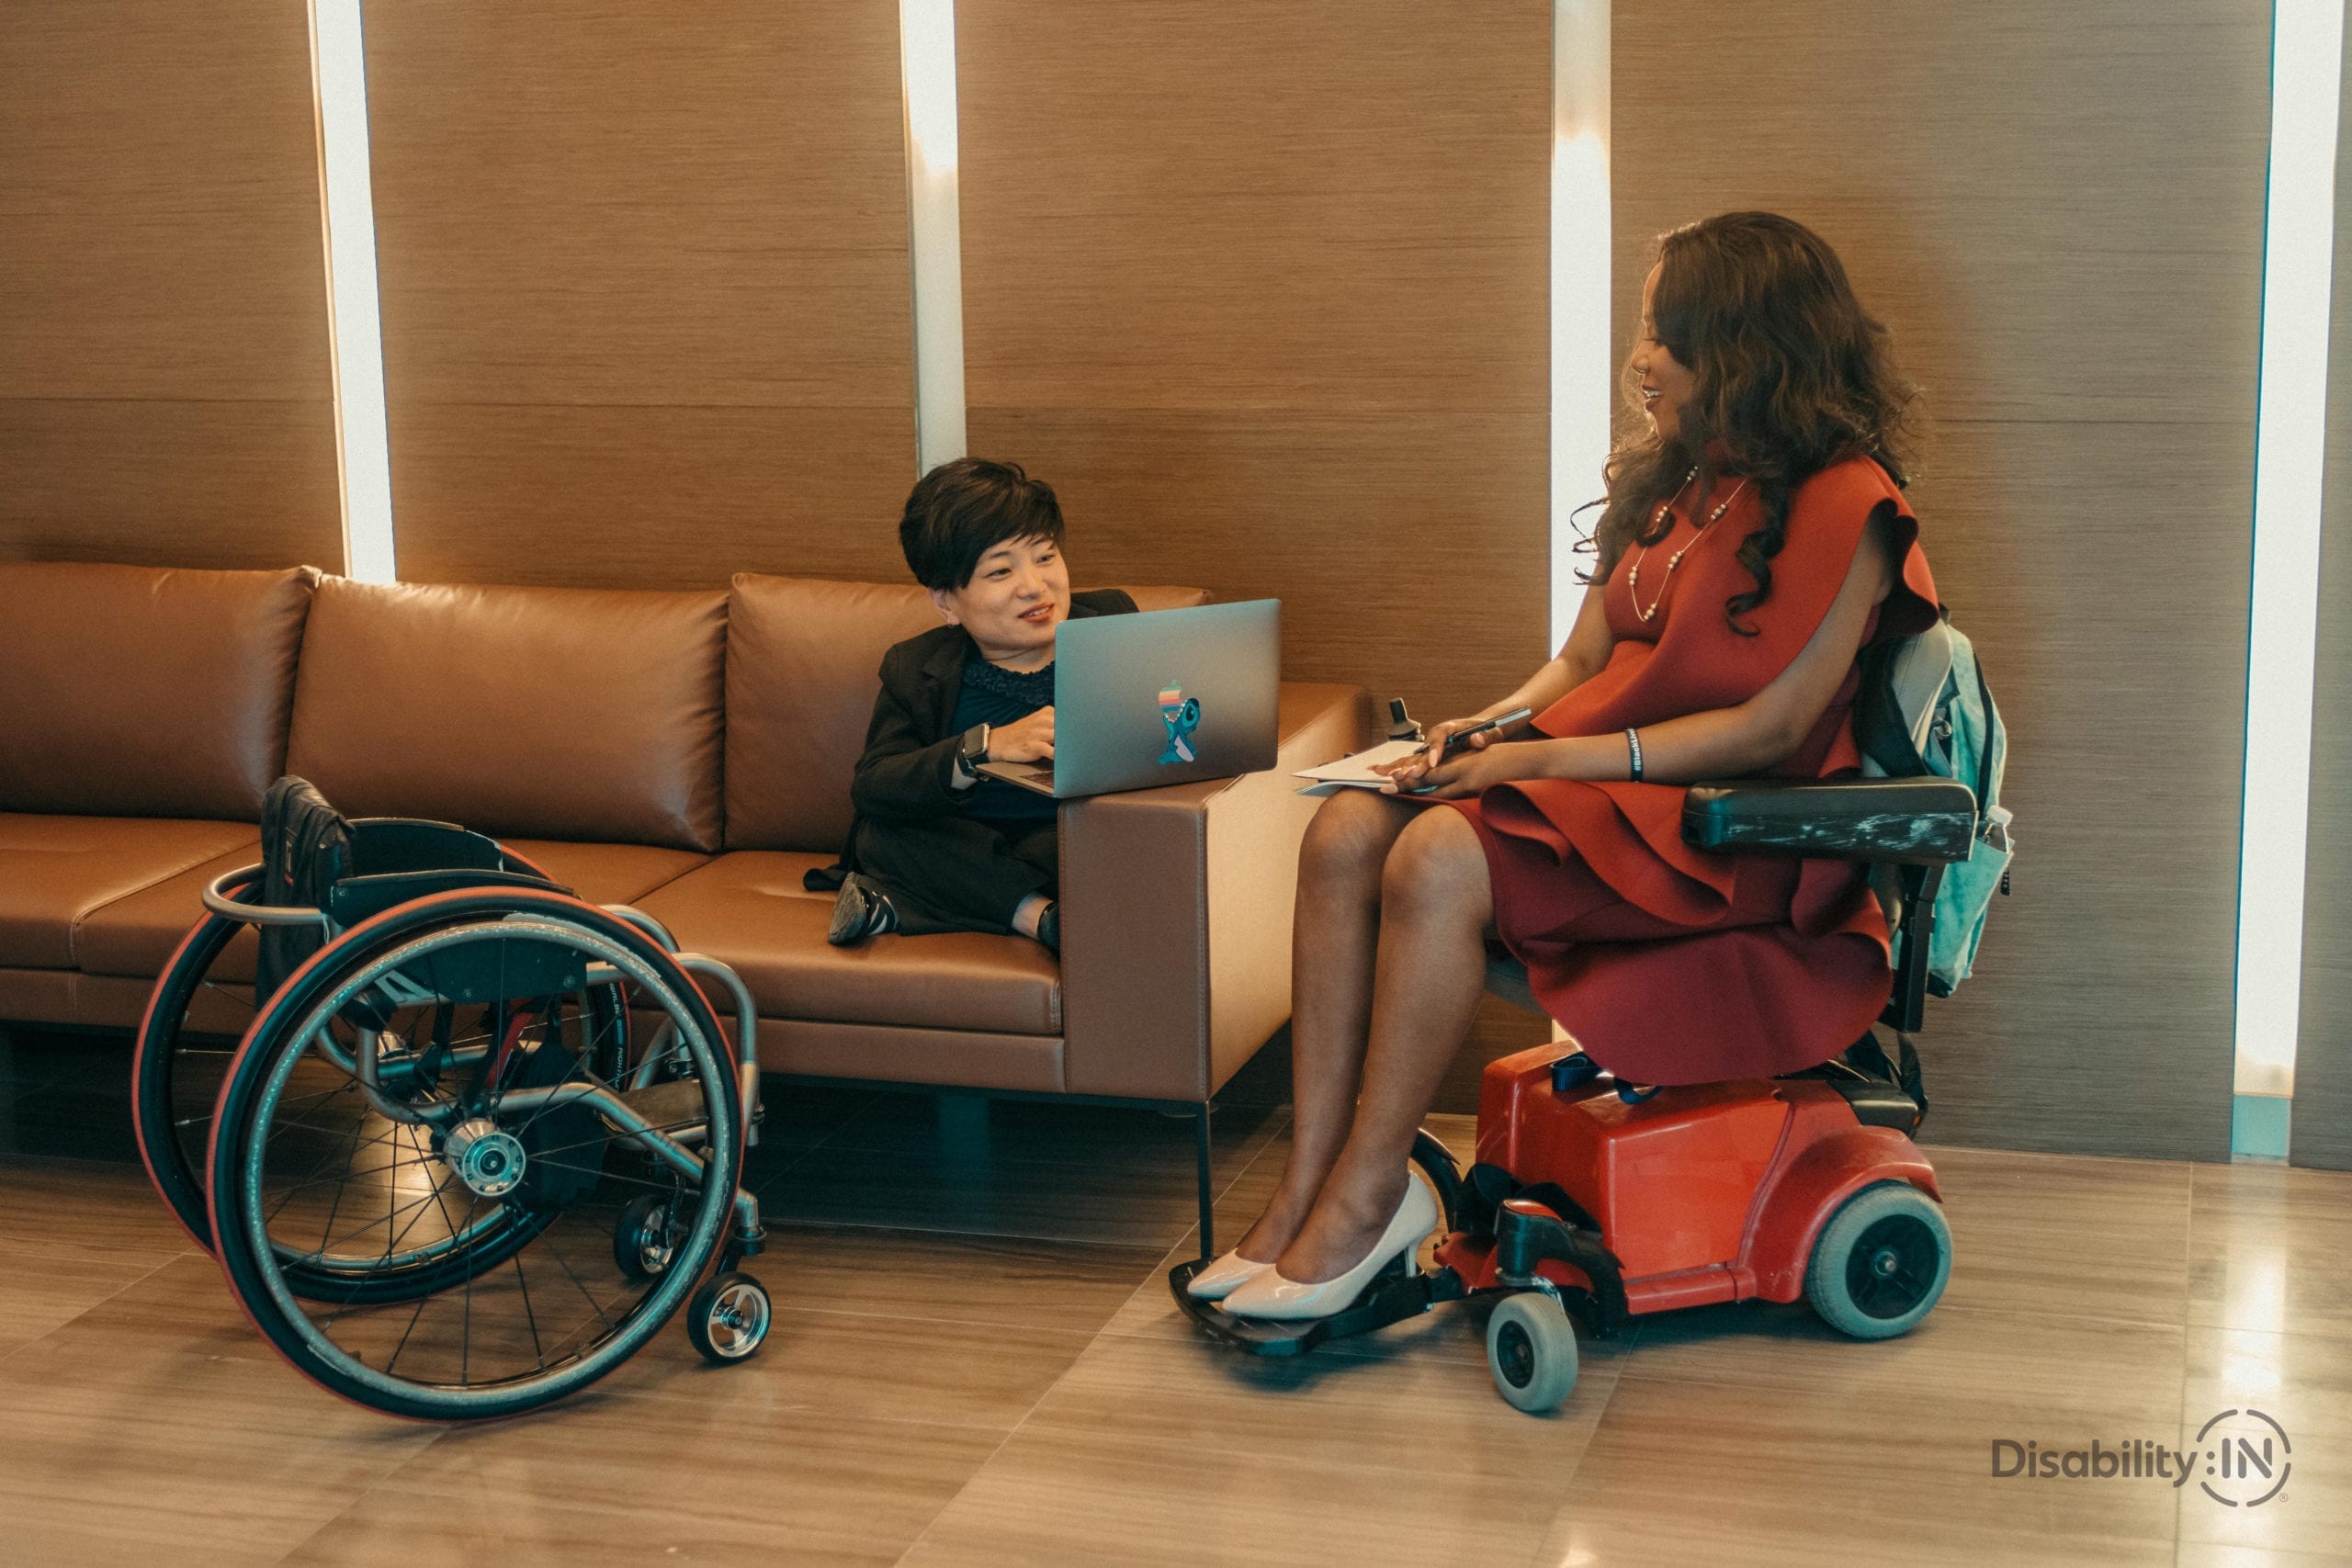 Two women in professional setting discuss work. Both women utilize a wheelchair.